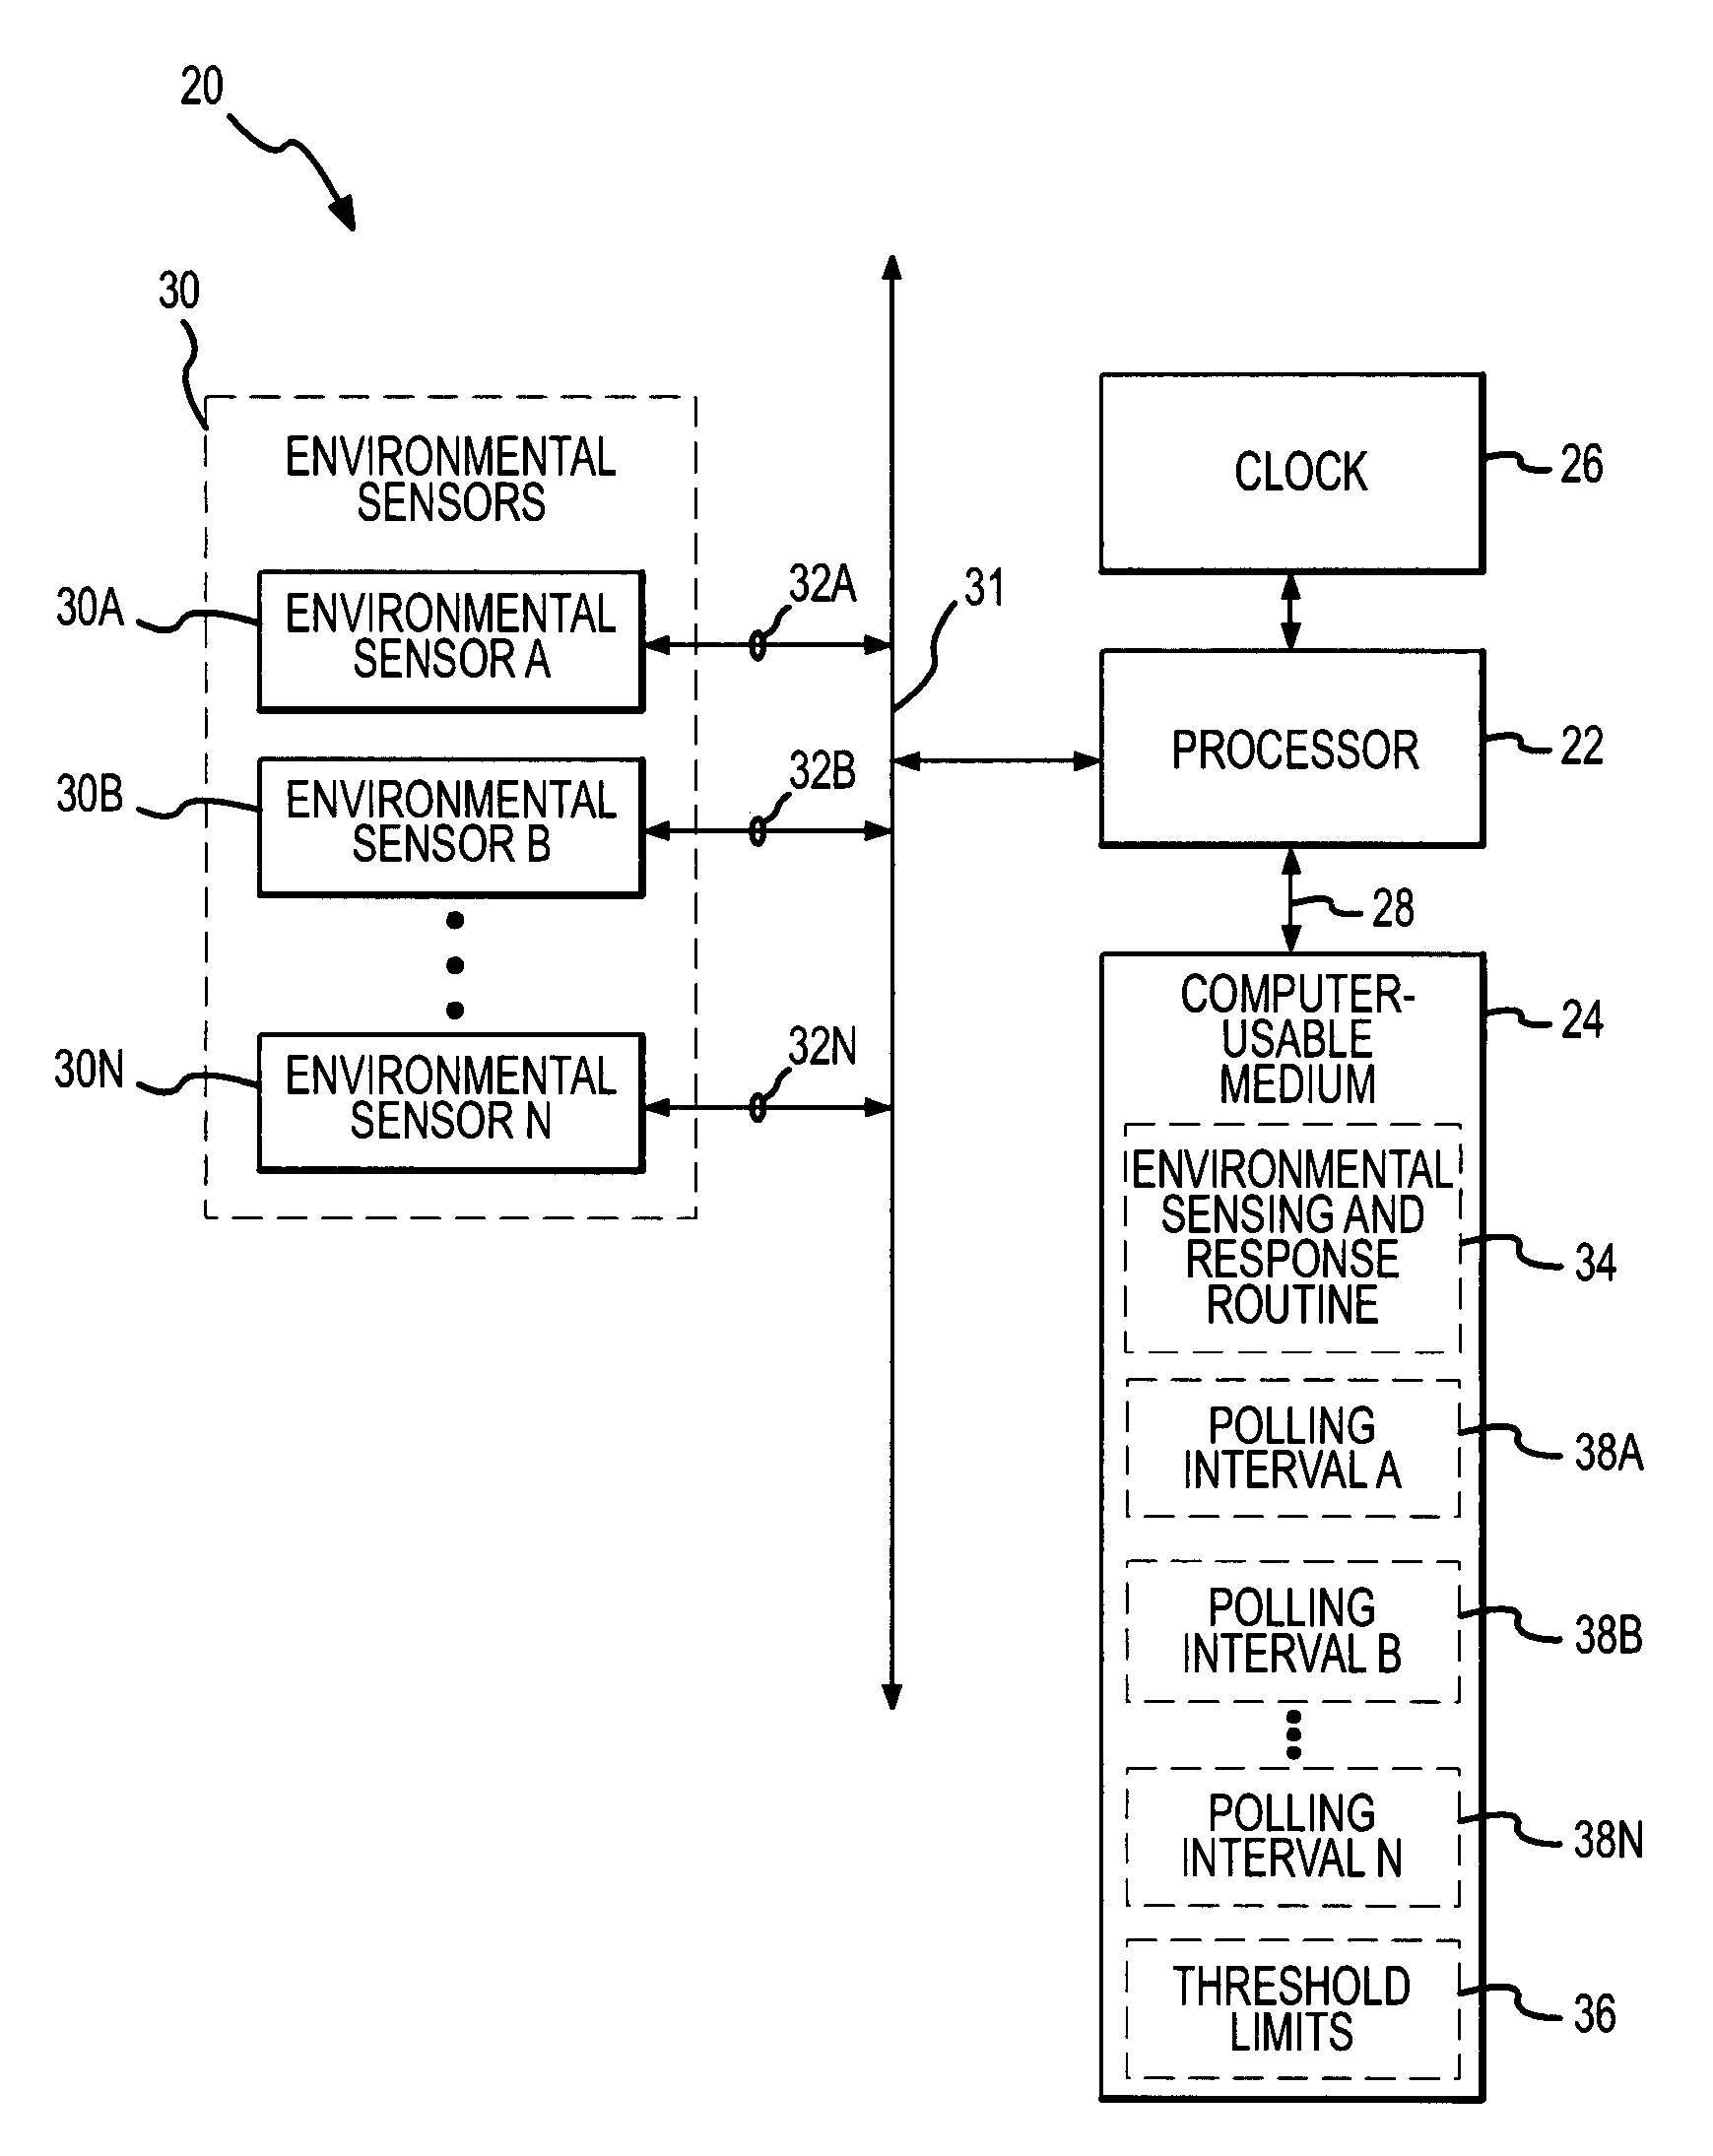 Apparatus and method for sensing and responding to environmental conditions of a computer system at non-uniform polling intervals